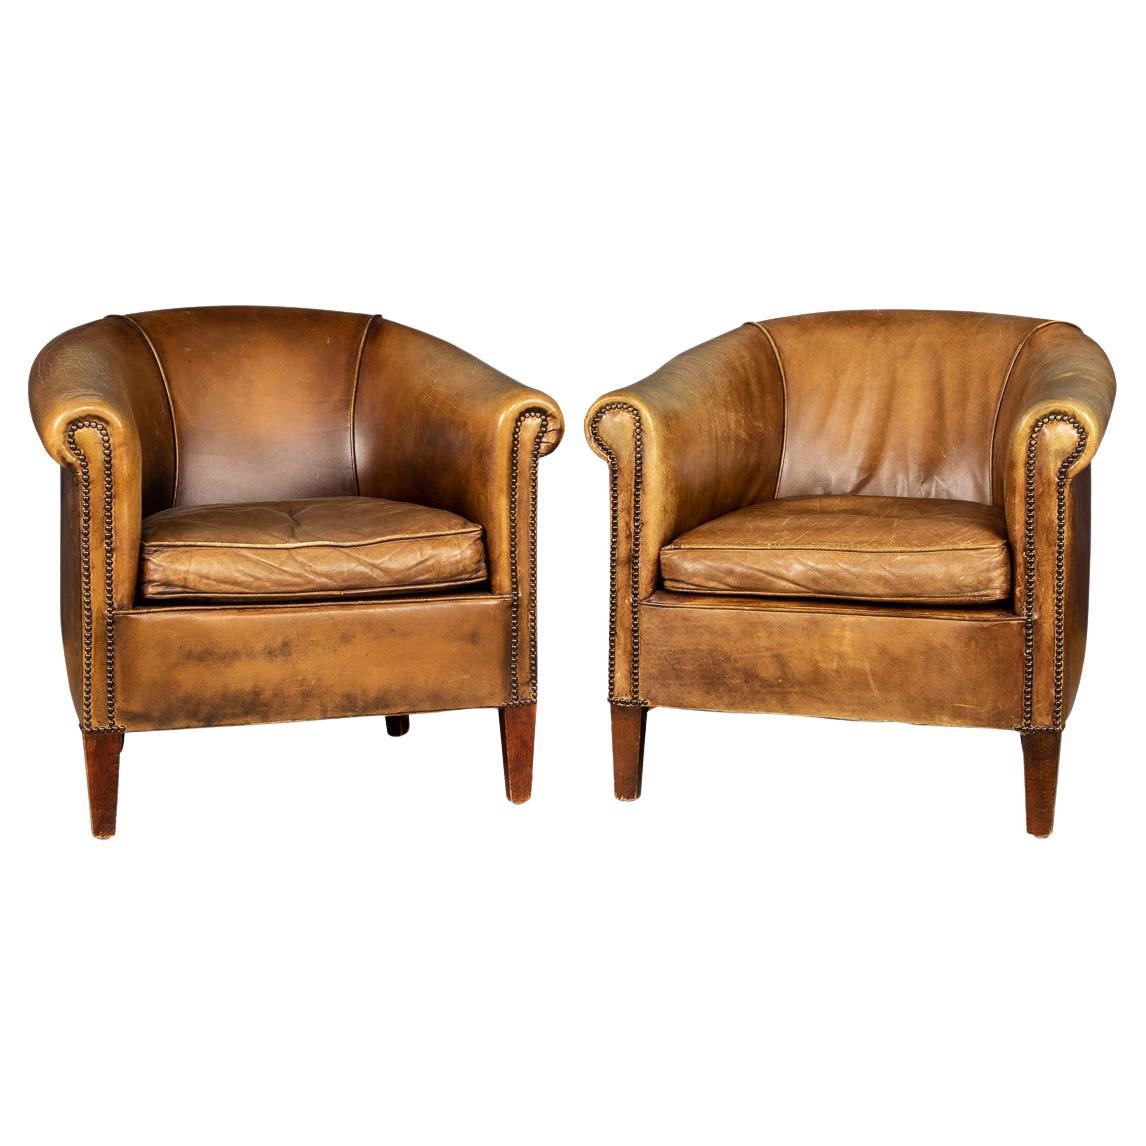 Late 20th Century Pair of Dutch Leather Club Chairs For Sale